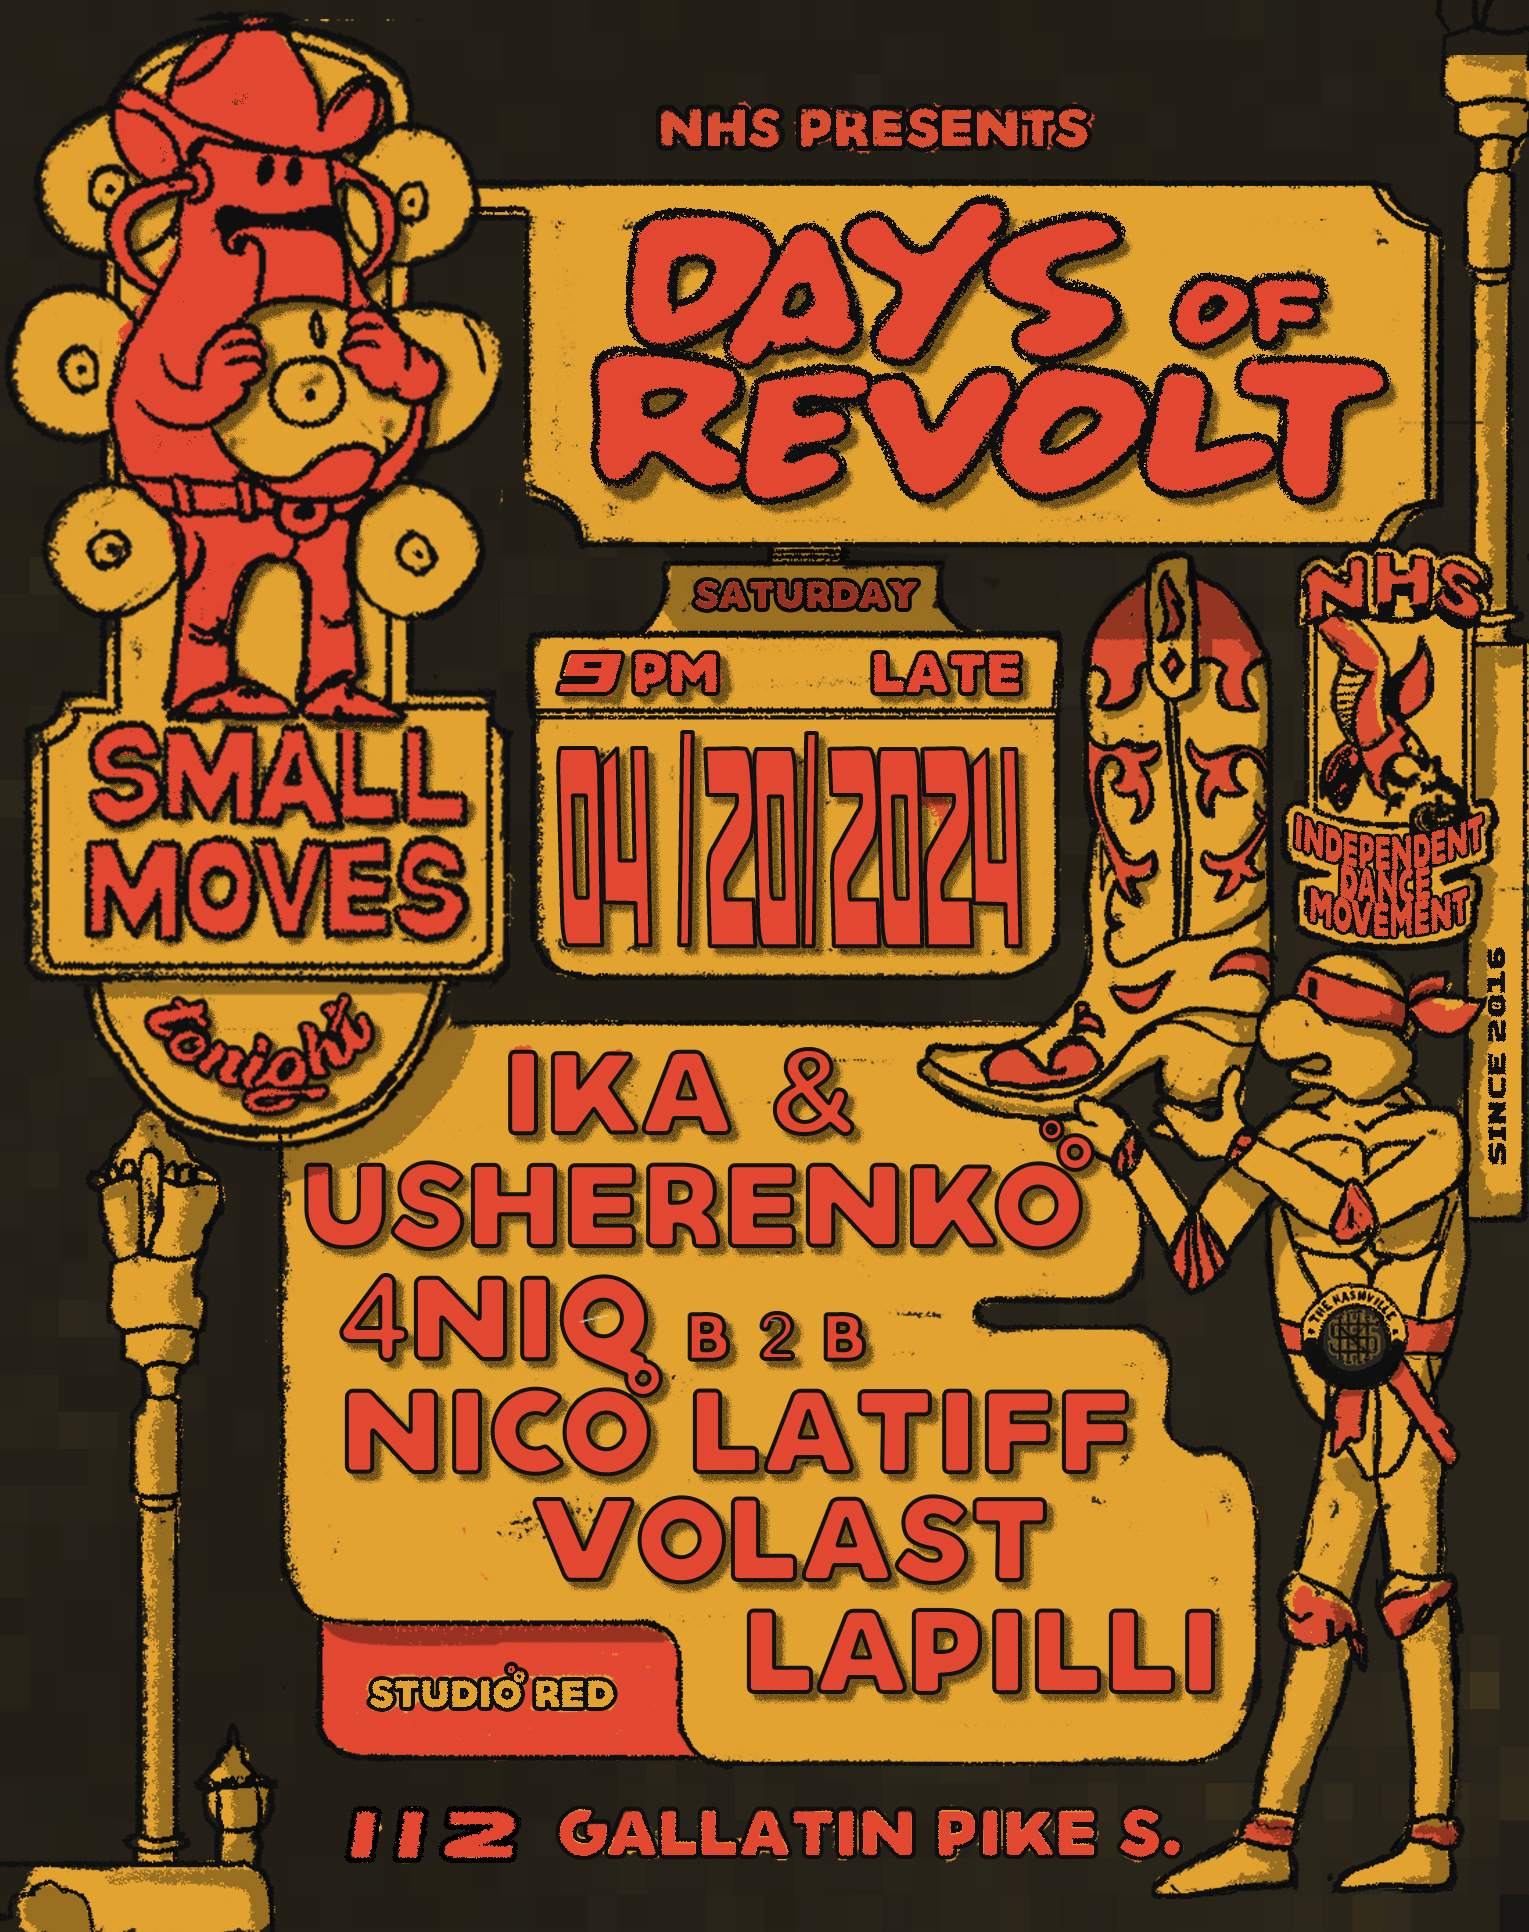 NHS presents 'Days of Revolt' - Small Moves - フライヤー表